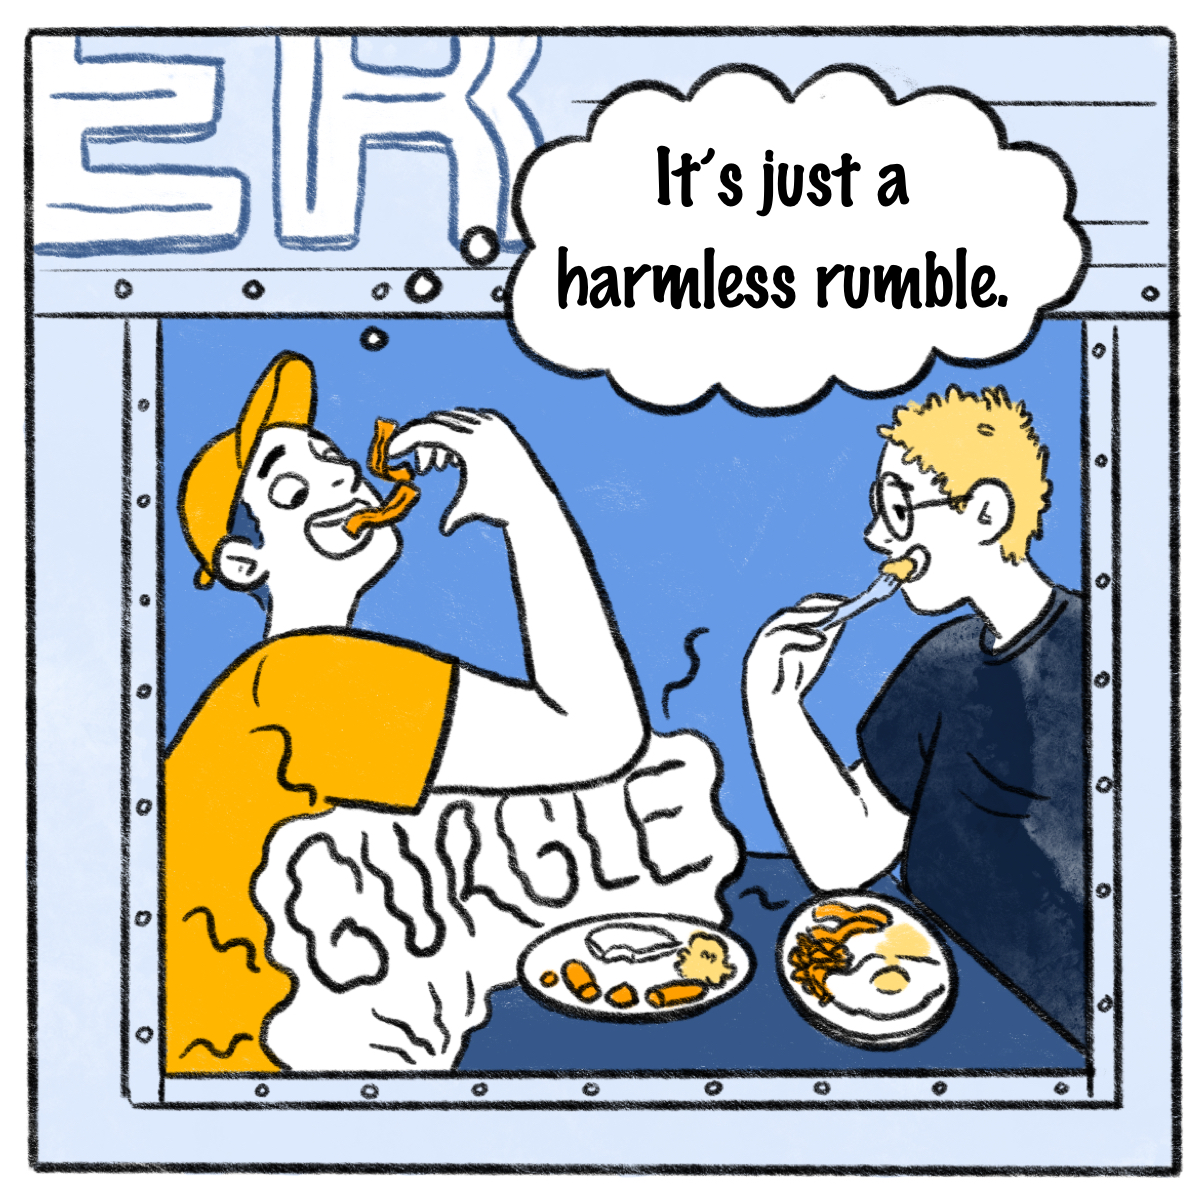 Two people are in a diner window eating breakfast, a gurgle comes from the man's stomach and a thought bubble says 